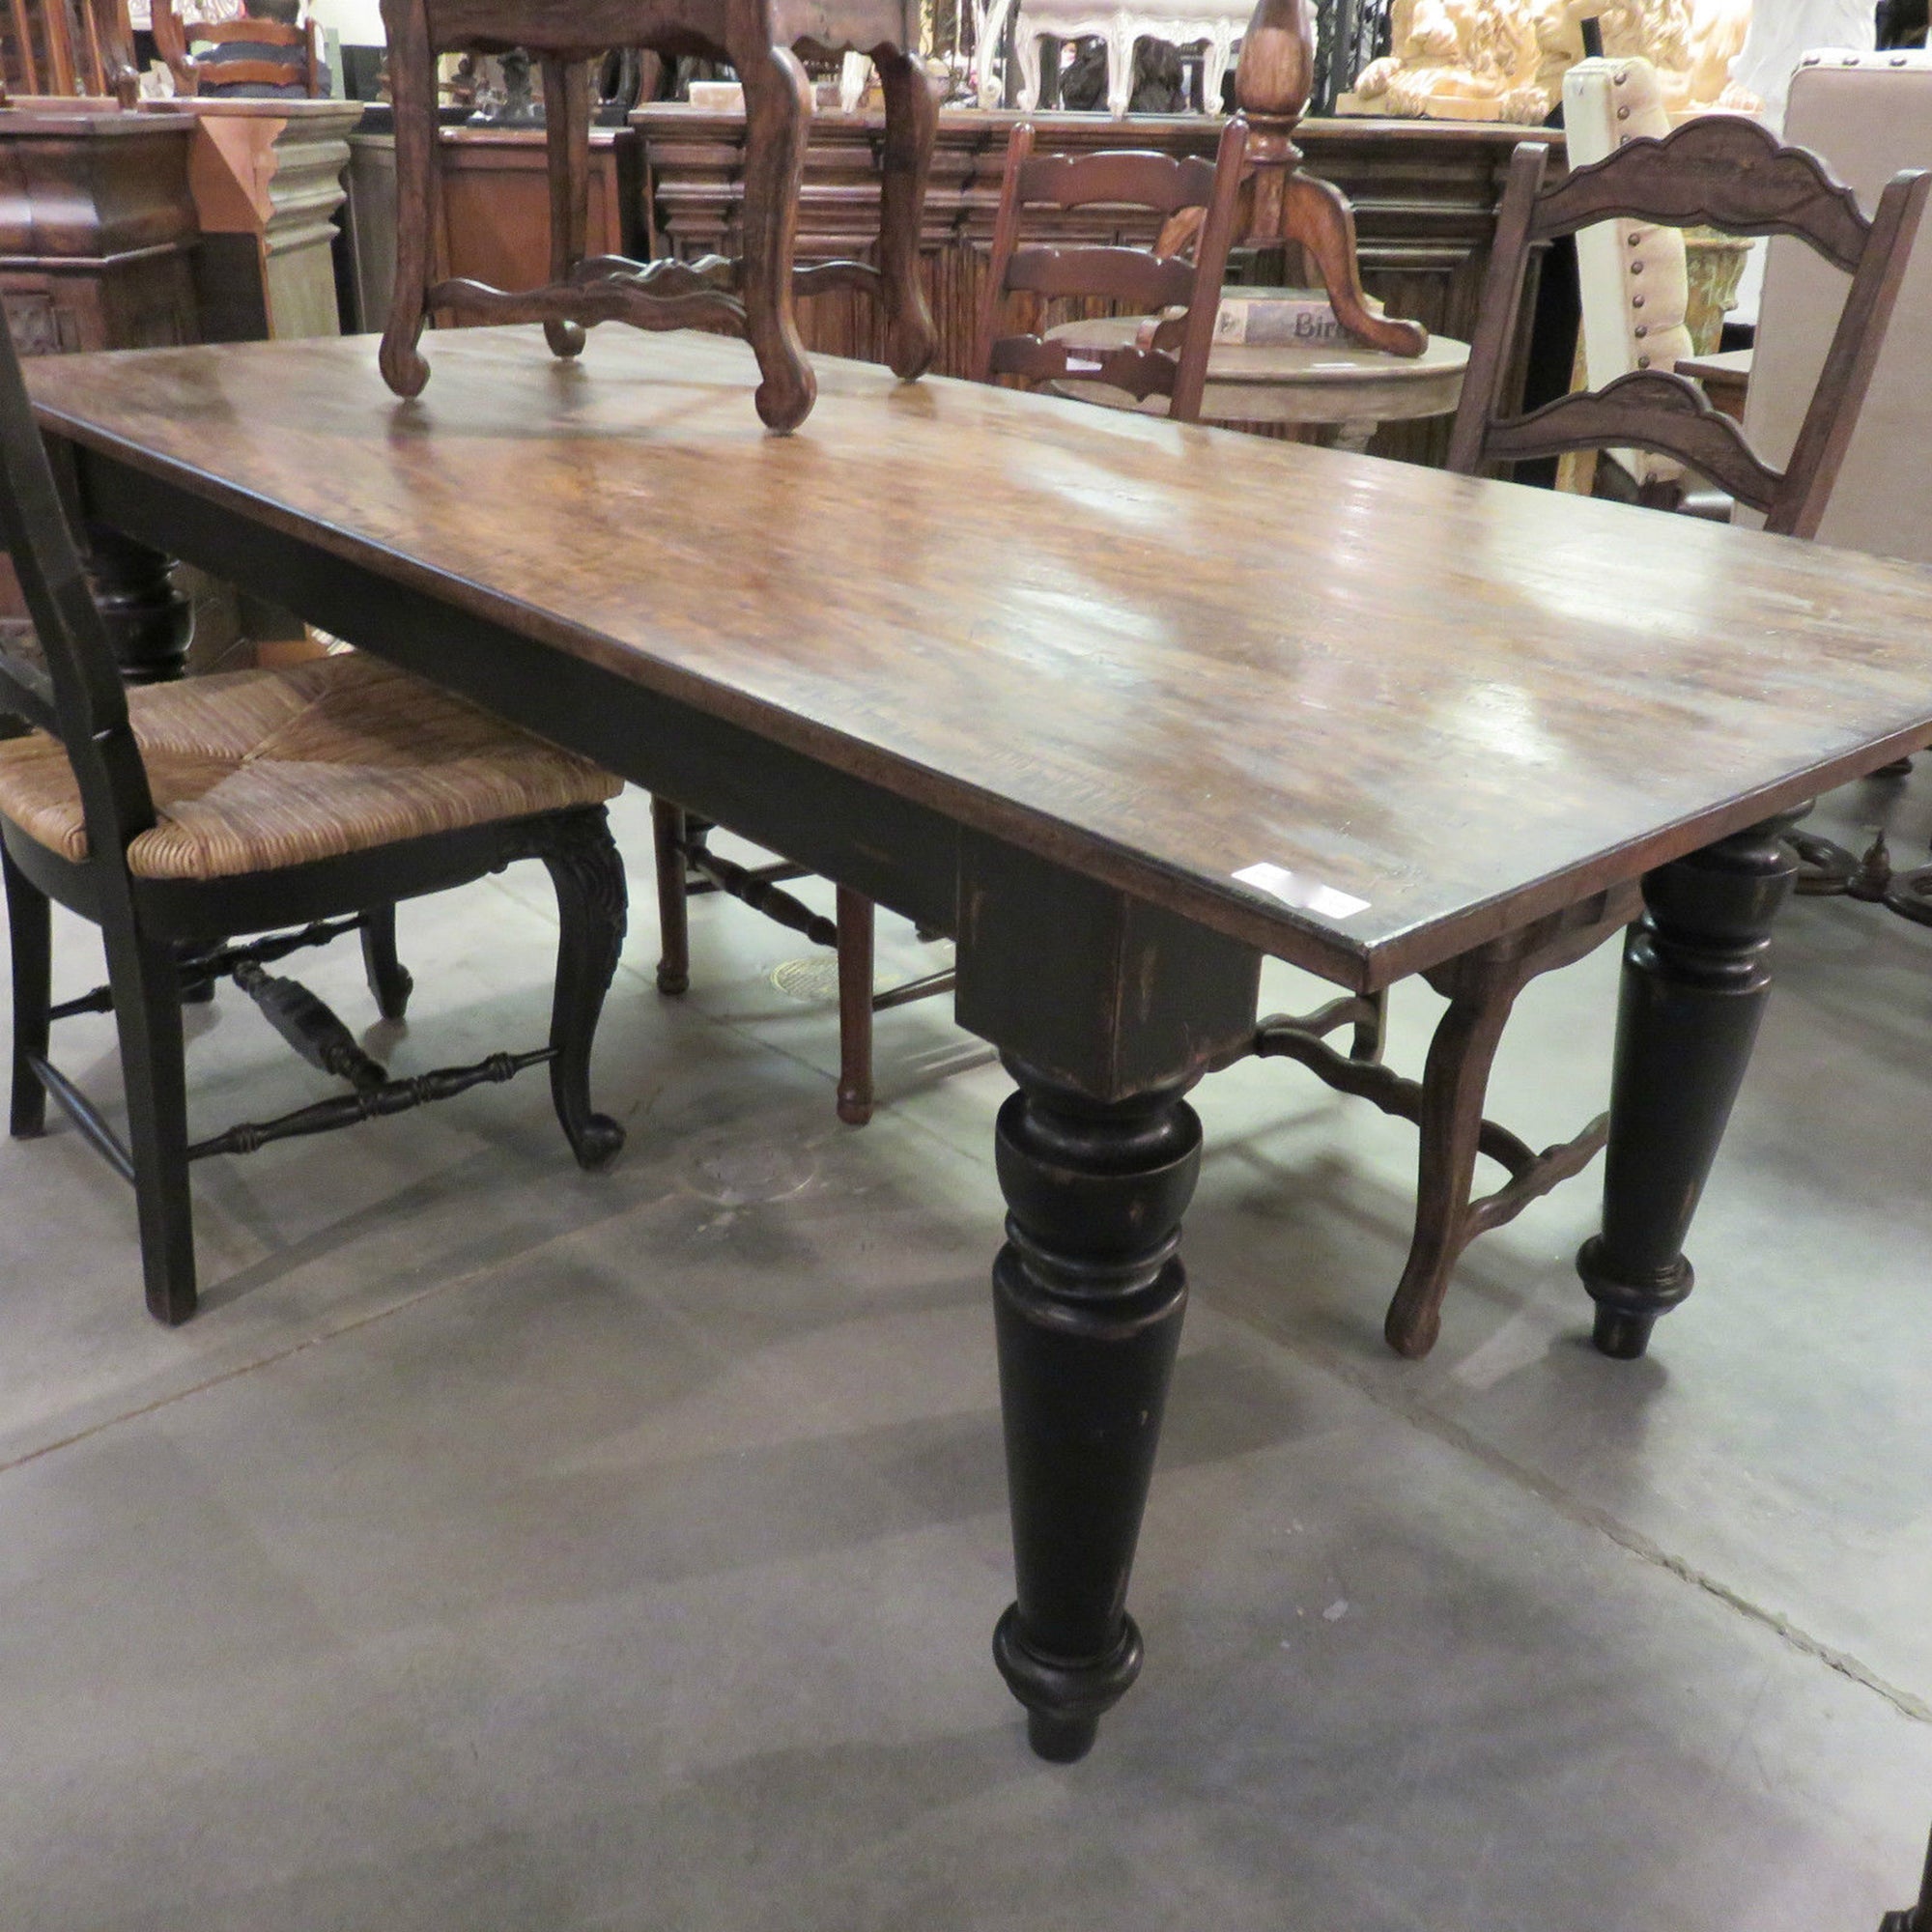 Rustic Farmhouse Dining Table 84" Black Distressed Reclaimed Wood Top - Furniture on Main